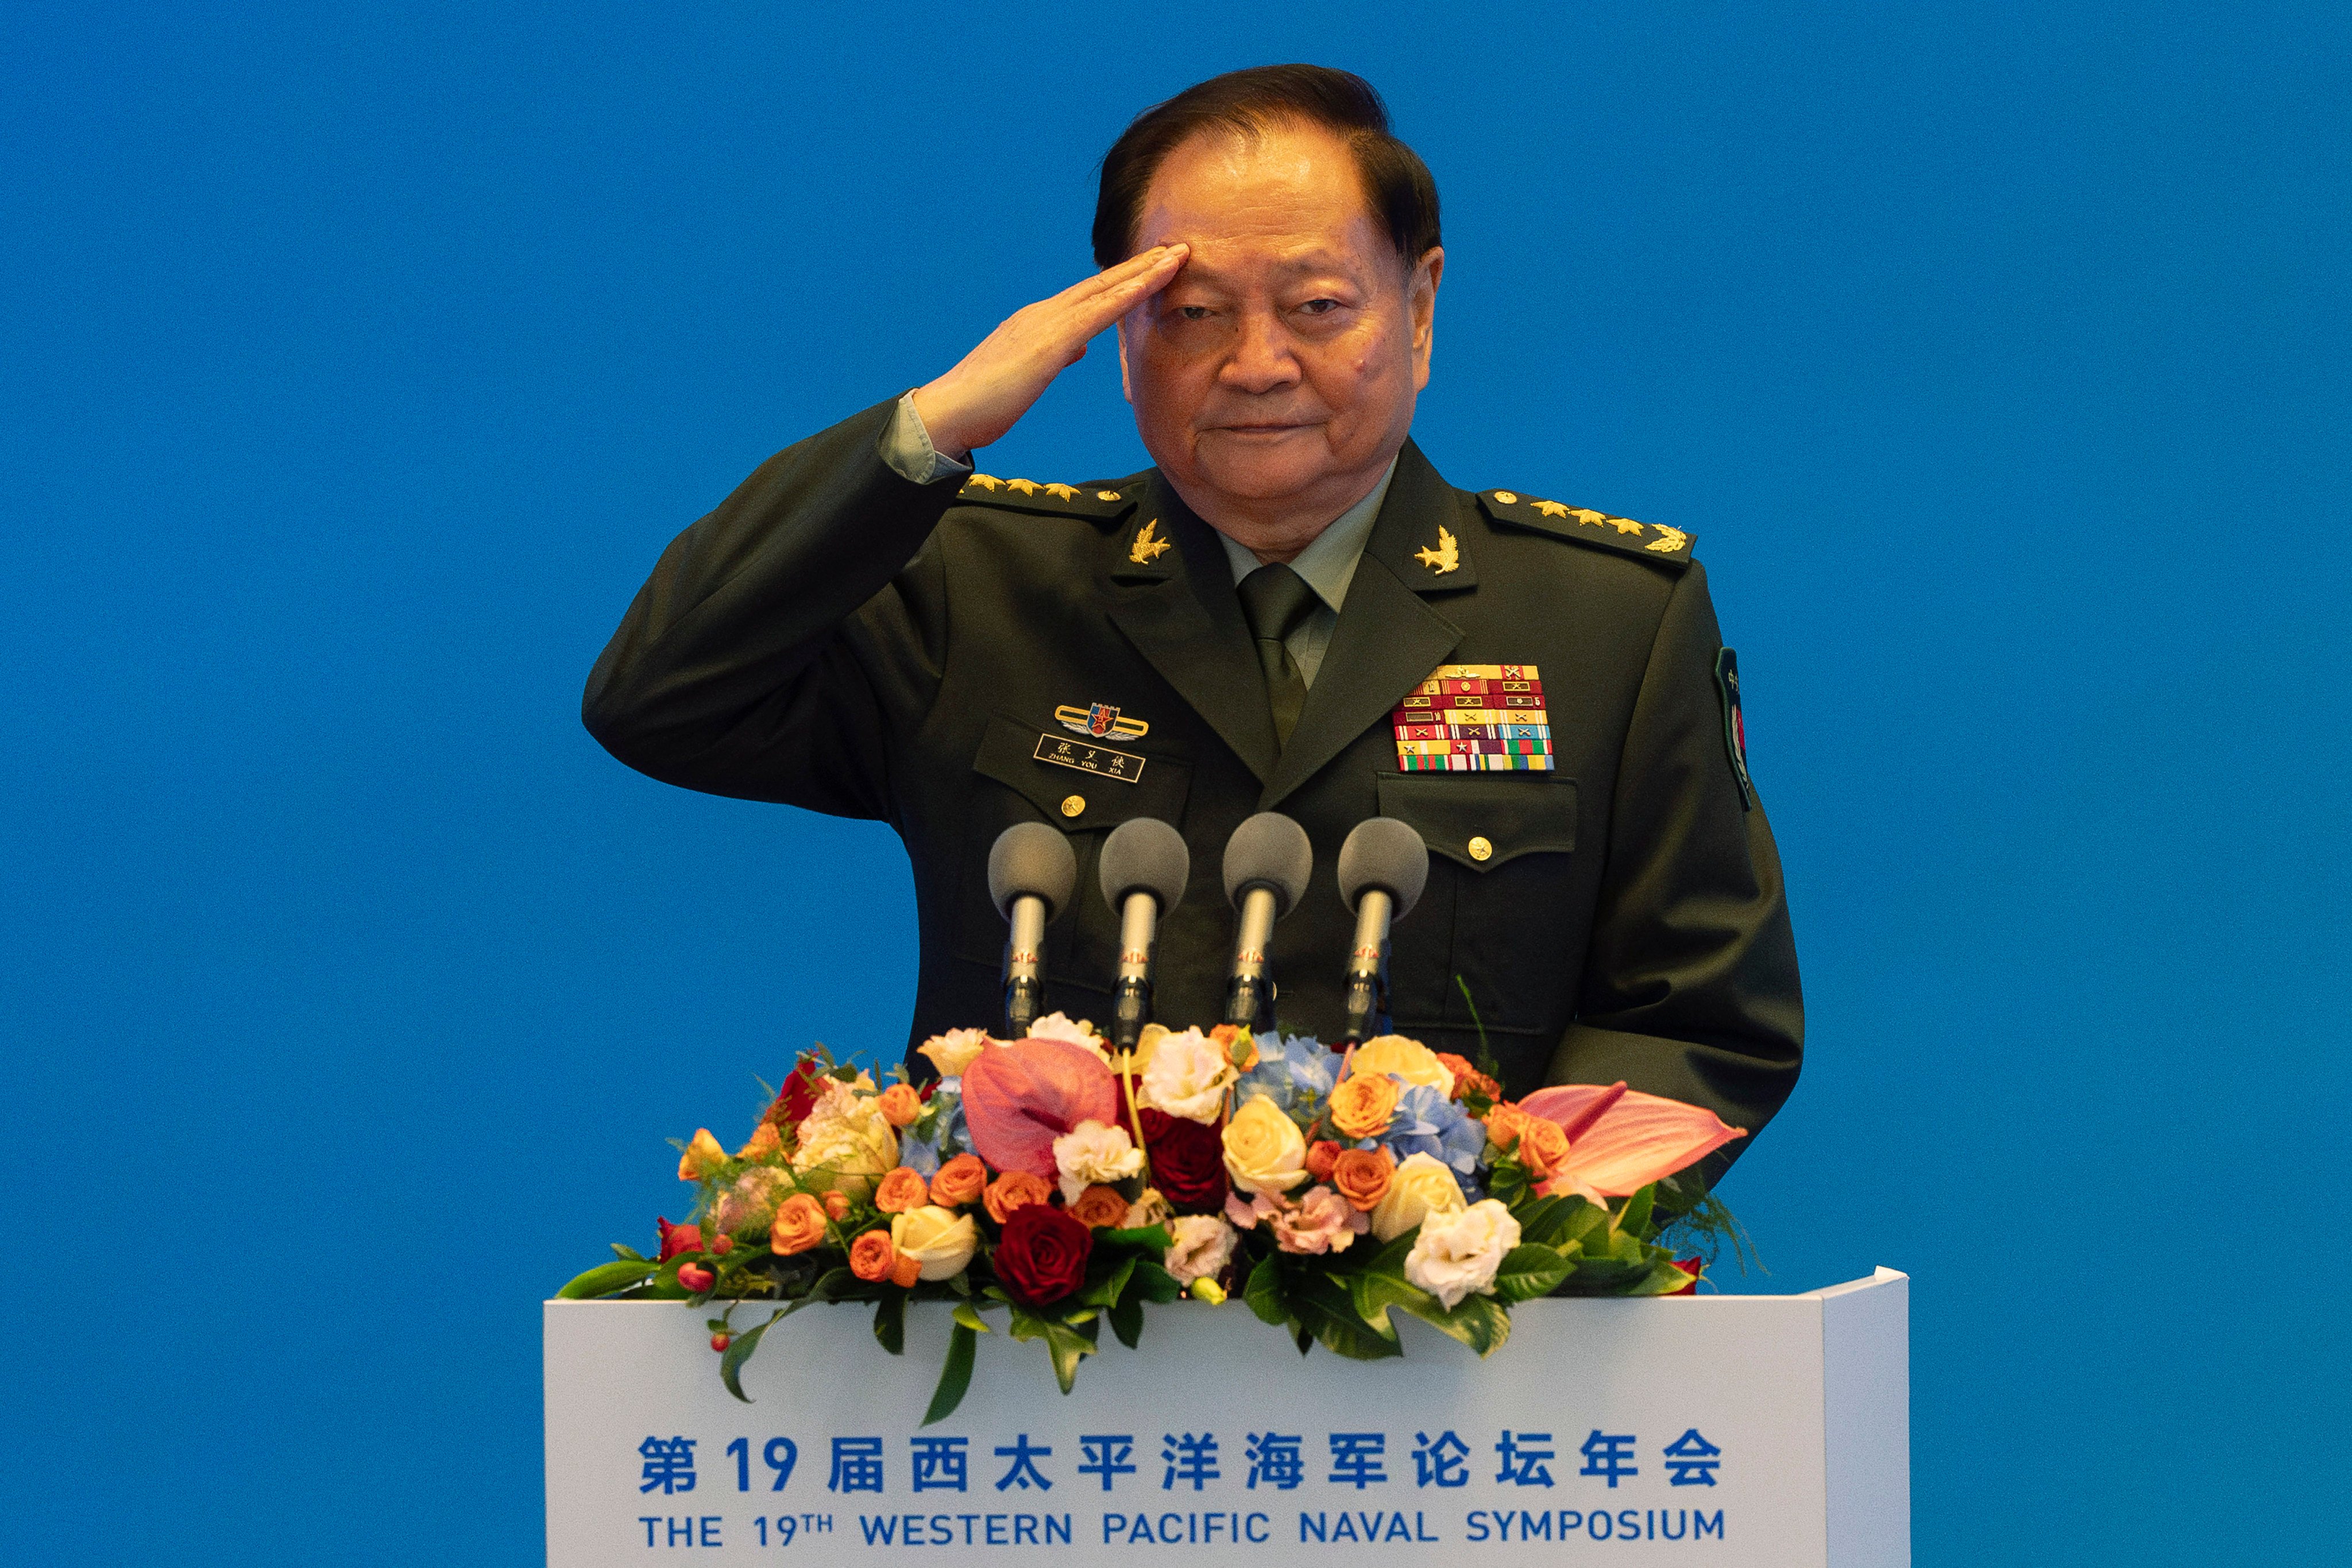 Zhang Youxia, vice-chairman of the CPC Central Military Commission, salutes before addressing the Western Pacific Navy Symposium in Qingdao, in eastern China’s Shandong province. Photo: AP